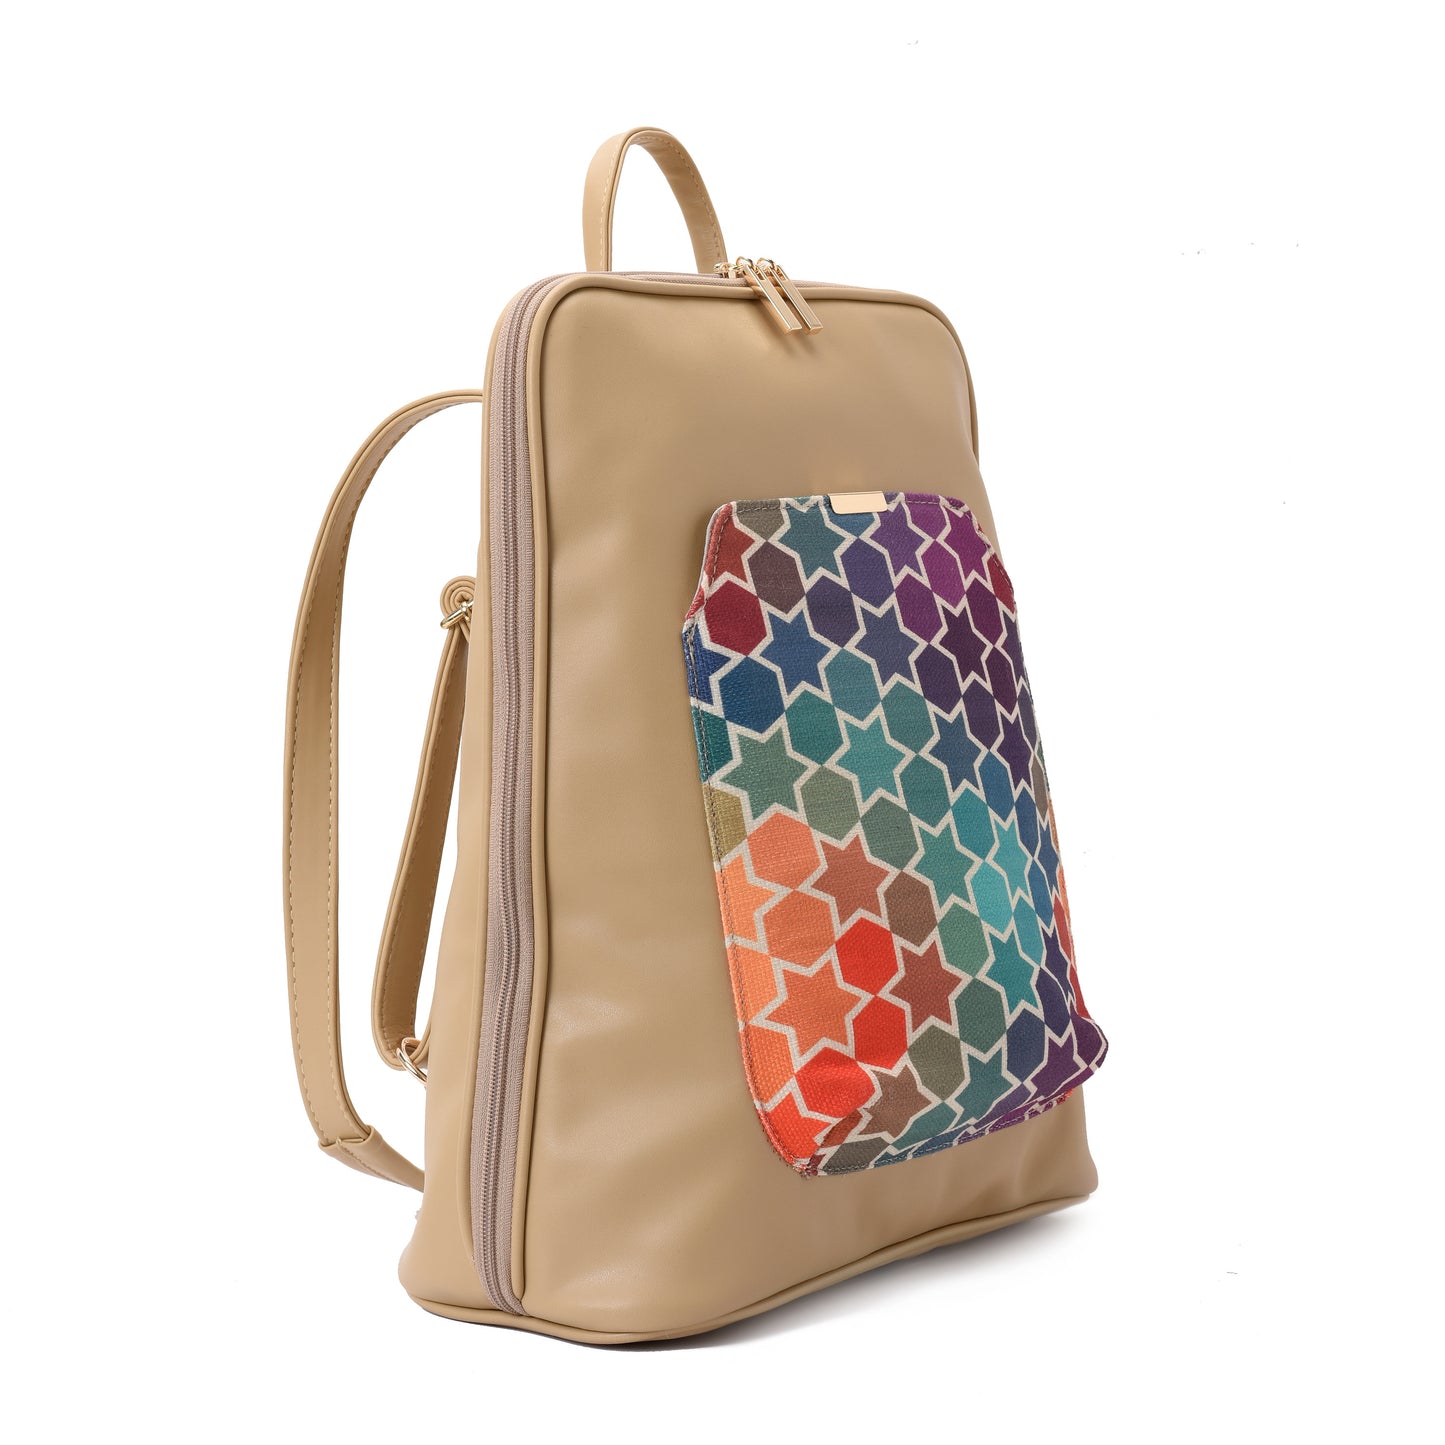 Laptop Beige with Colorful stars fabric Backpack/Cross - Code 2006